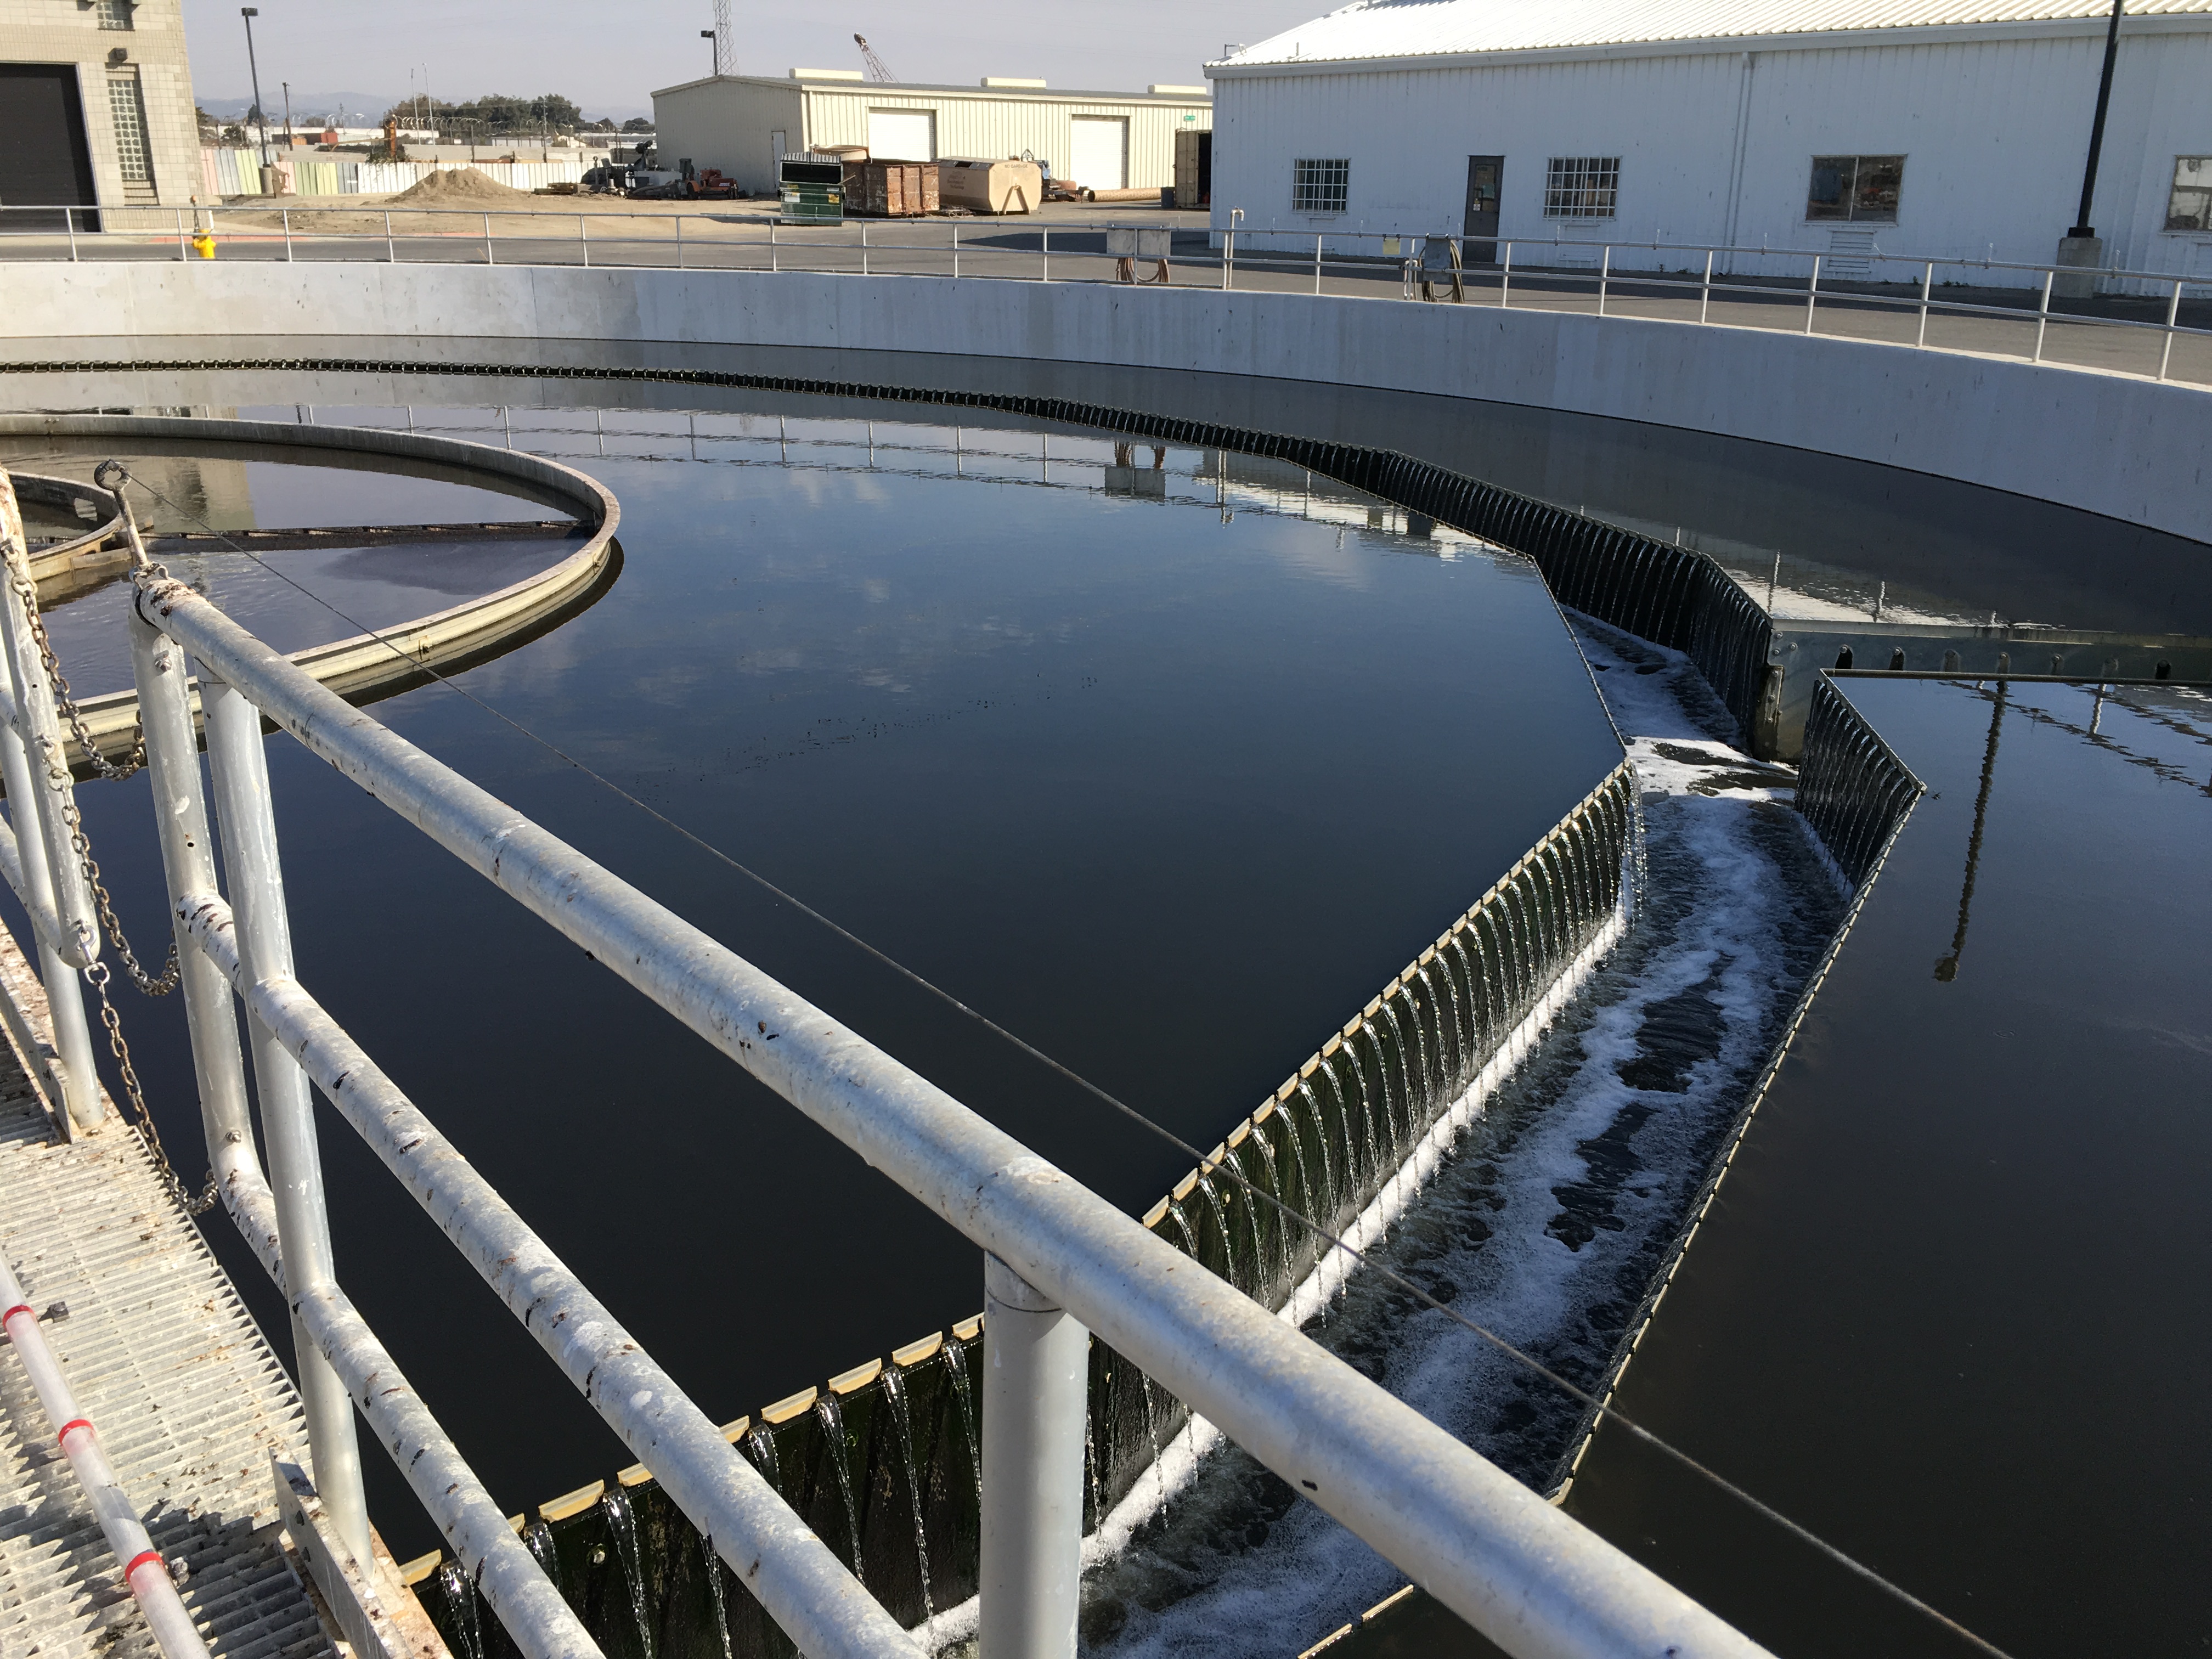 Secondary clarify removes suspended solids, organic matter, which are then thickened and broken down in anaerobic digesters. The digesters produce biogas that fuel the on-site co-generation engine. 